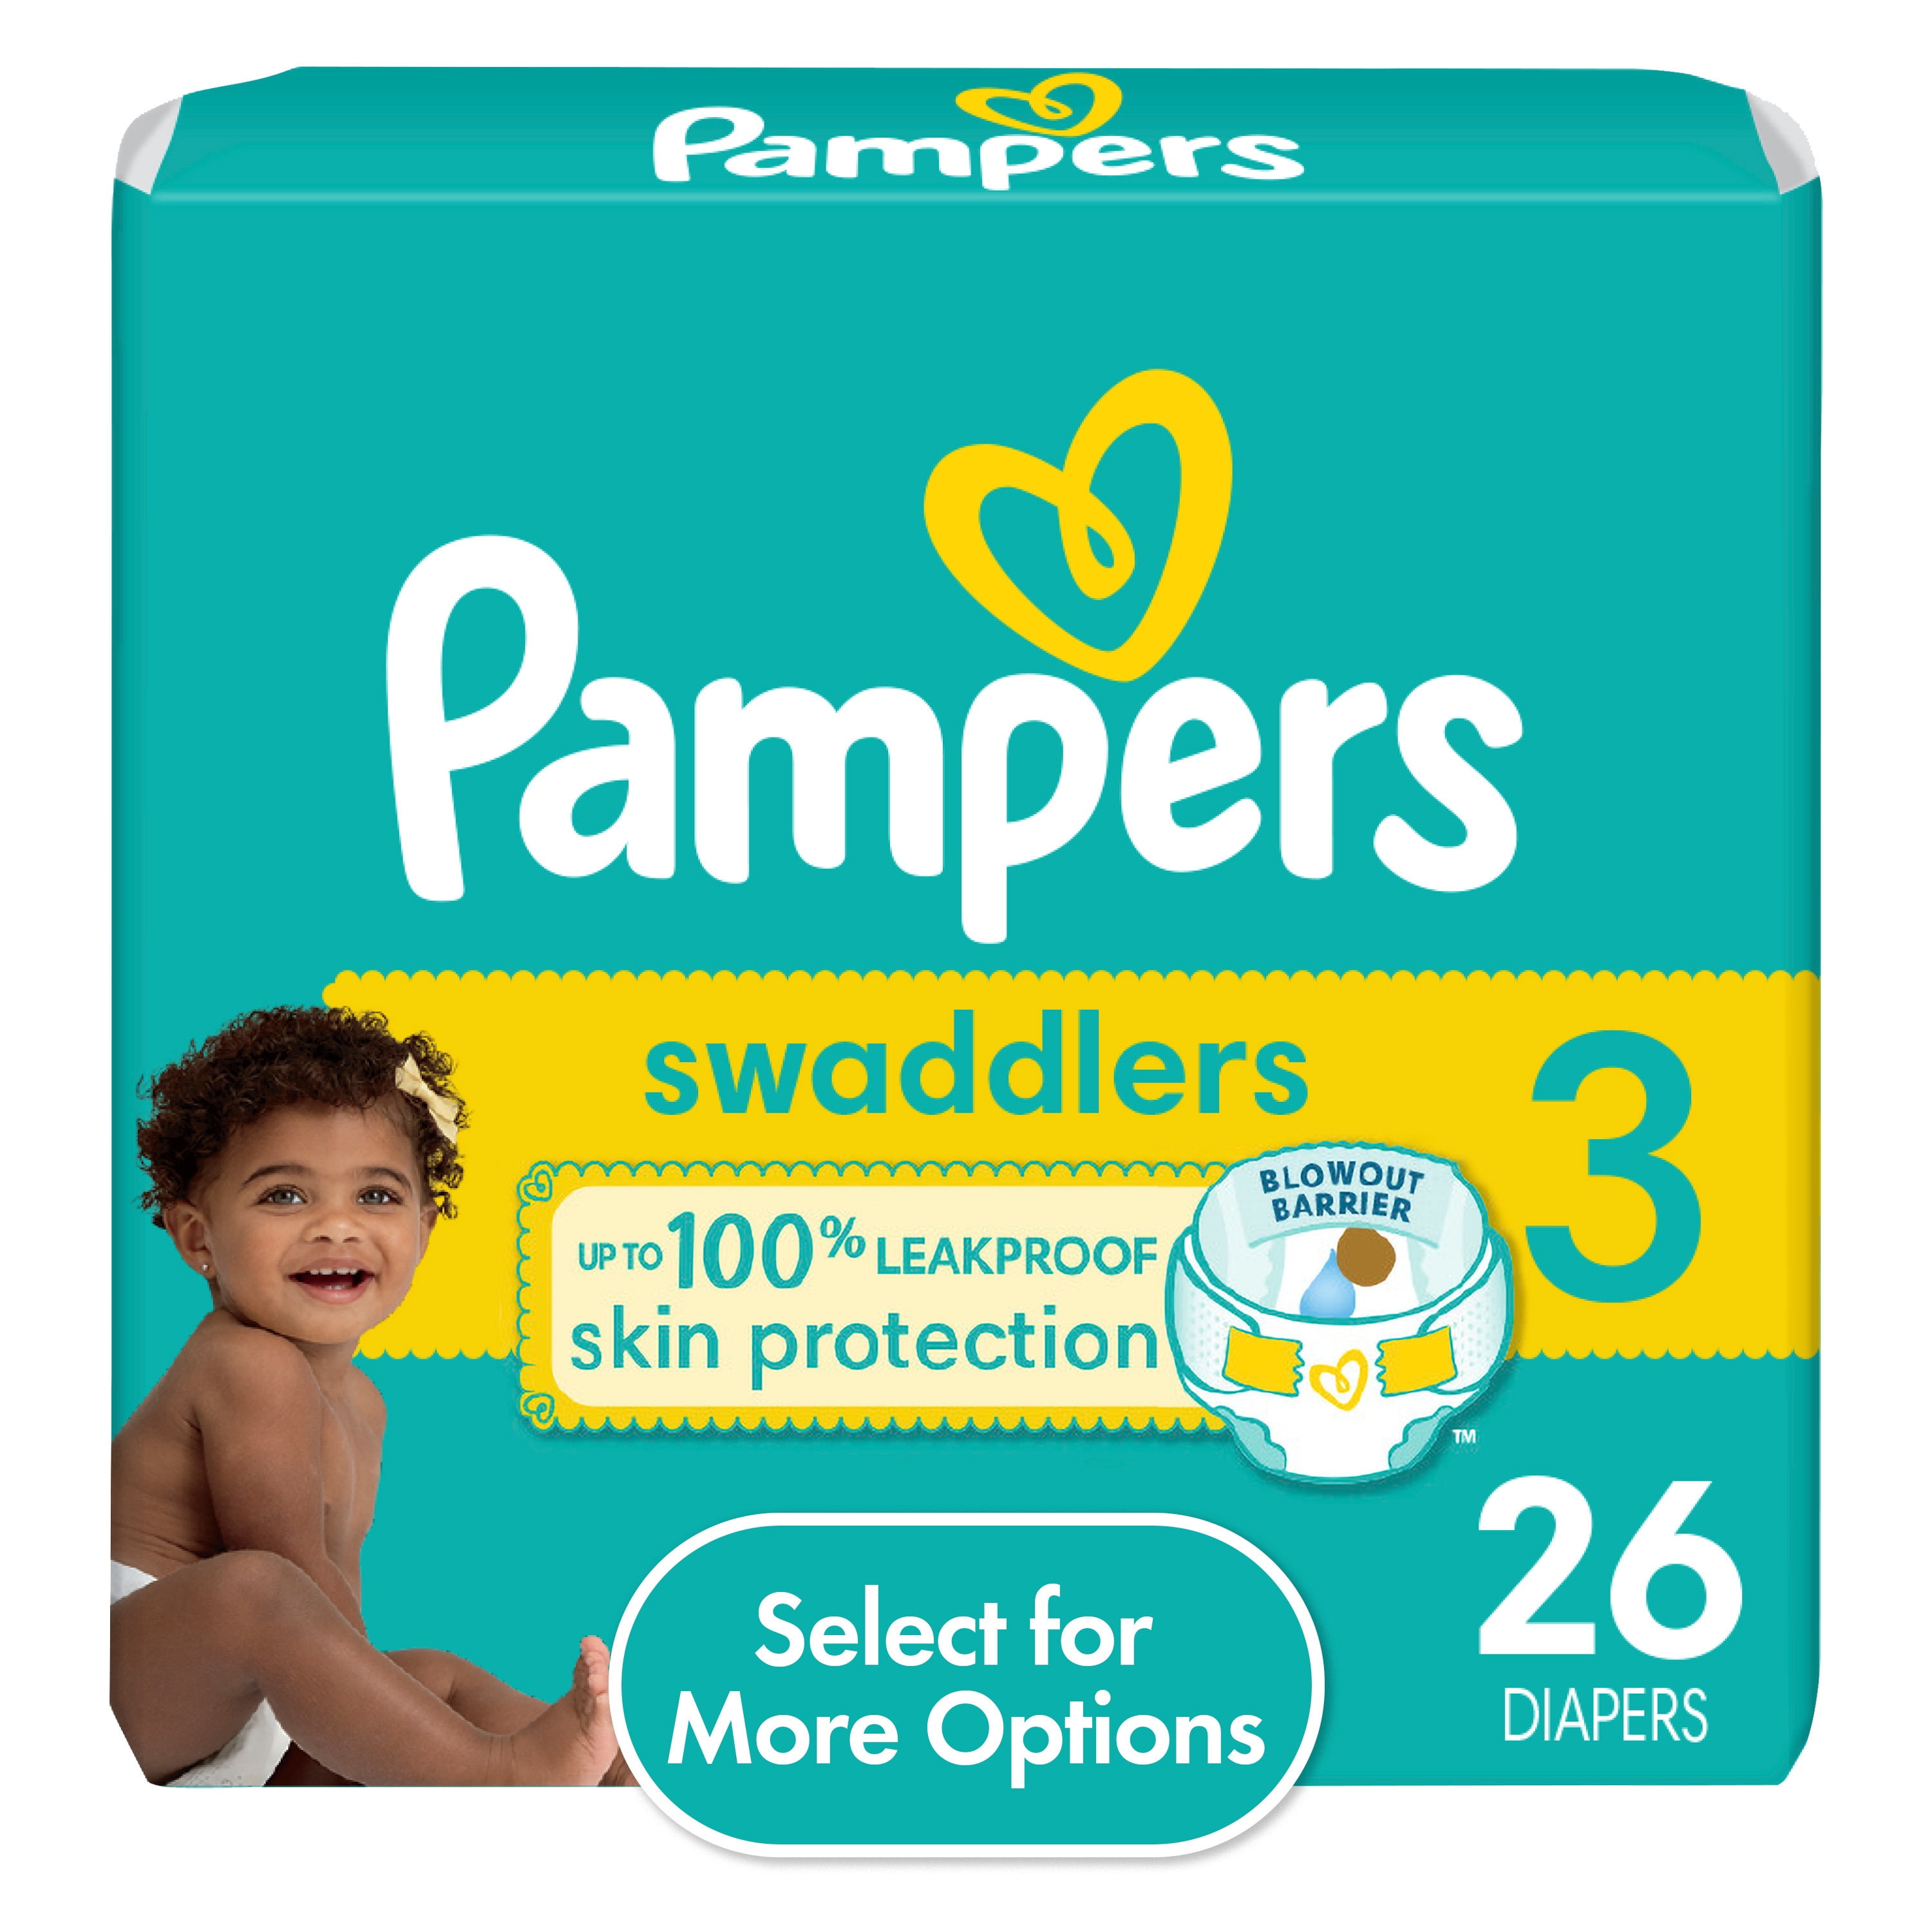 Pampers Swaddlers Diapers, Size 3, 26 Count (Select for More Options) 